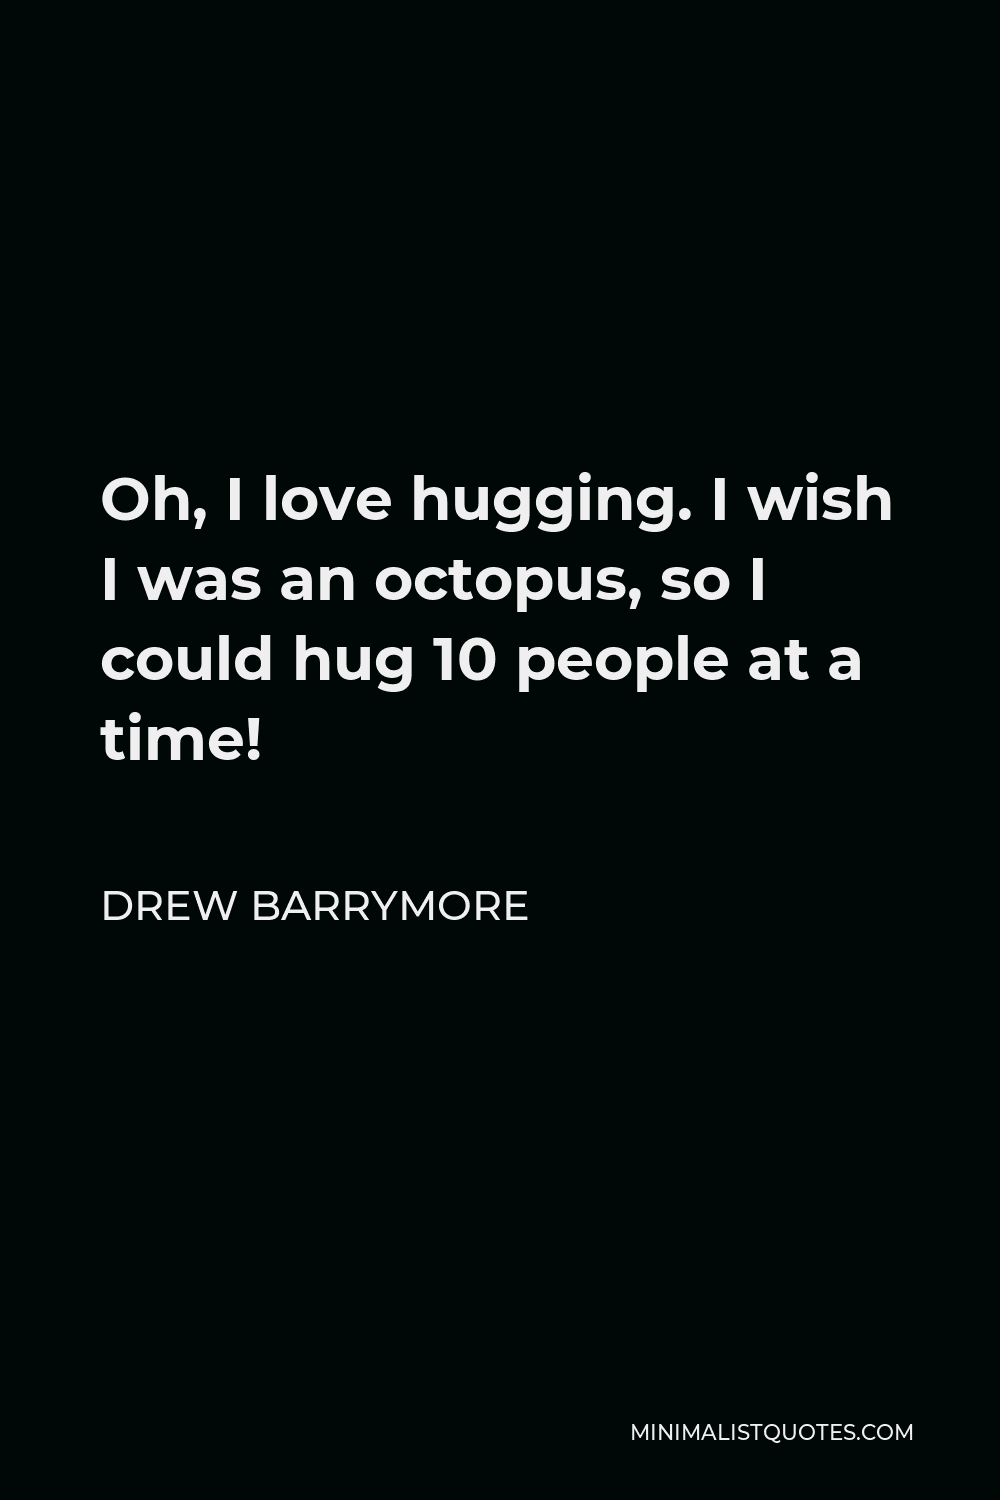 Drew Barrymore Quote - Oh, I love hugging. I wish I was an octopus, so I could hug 10 people at a time!